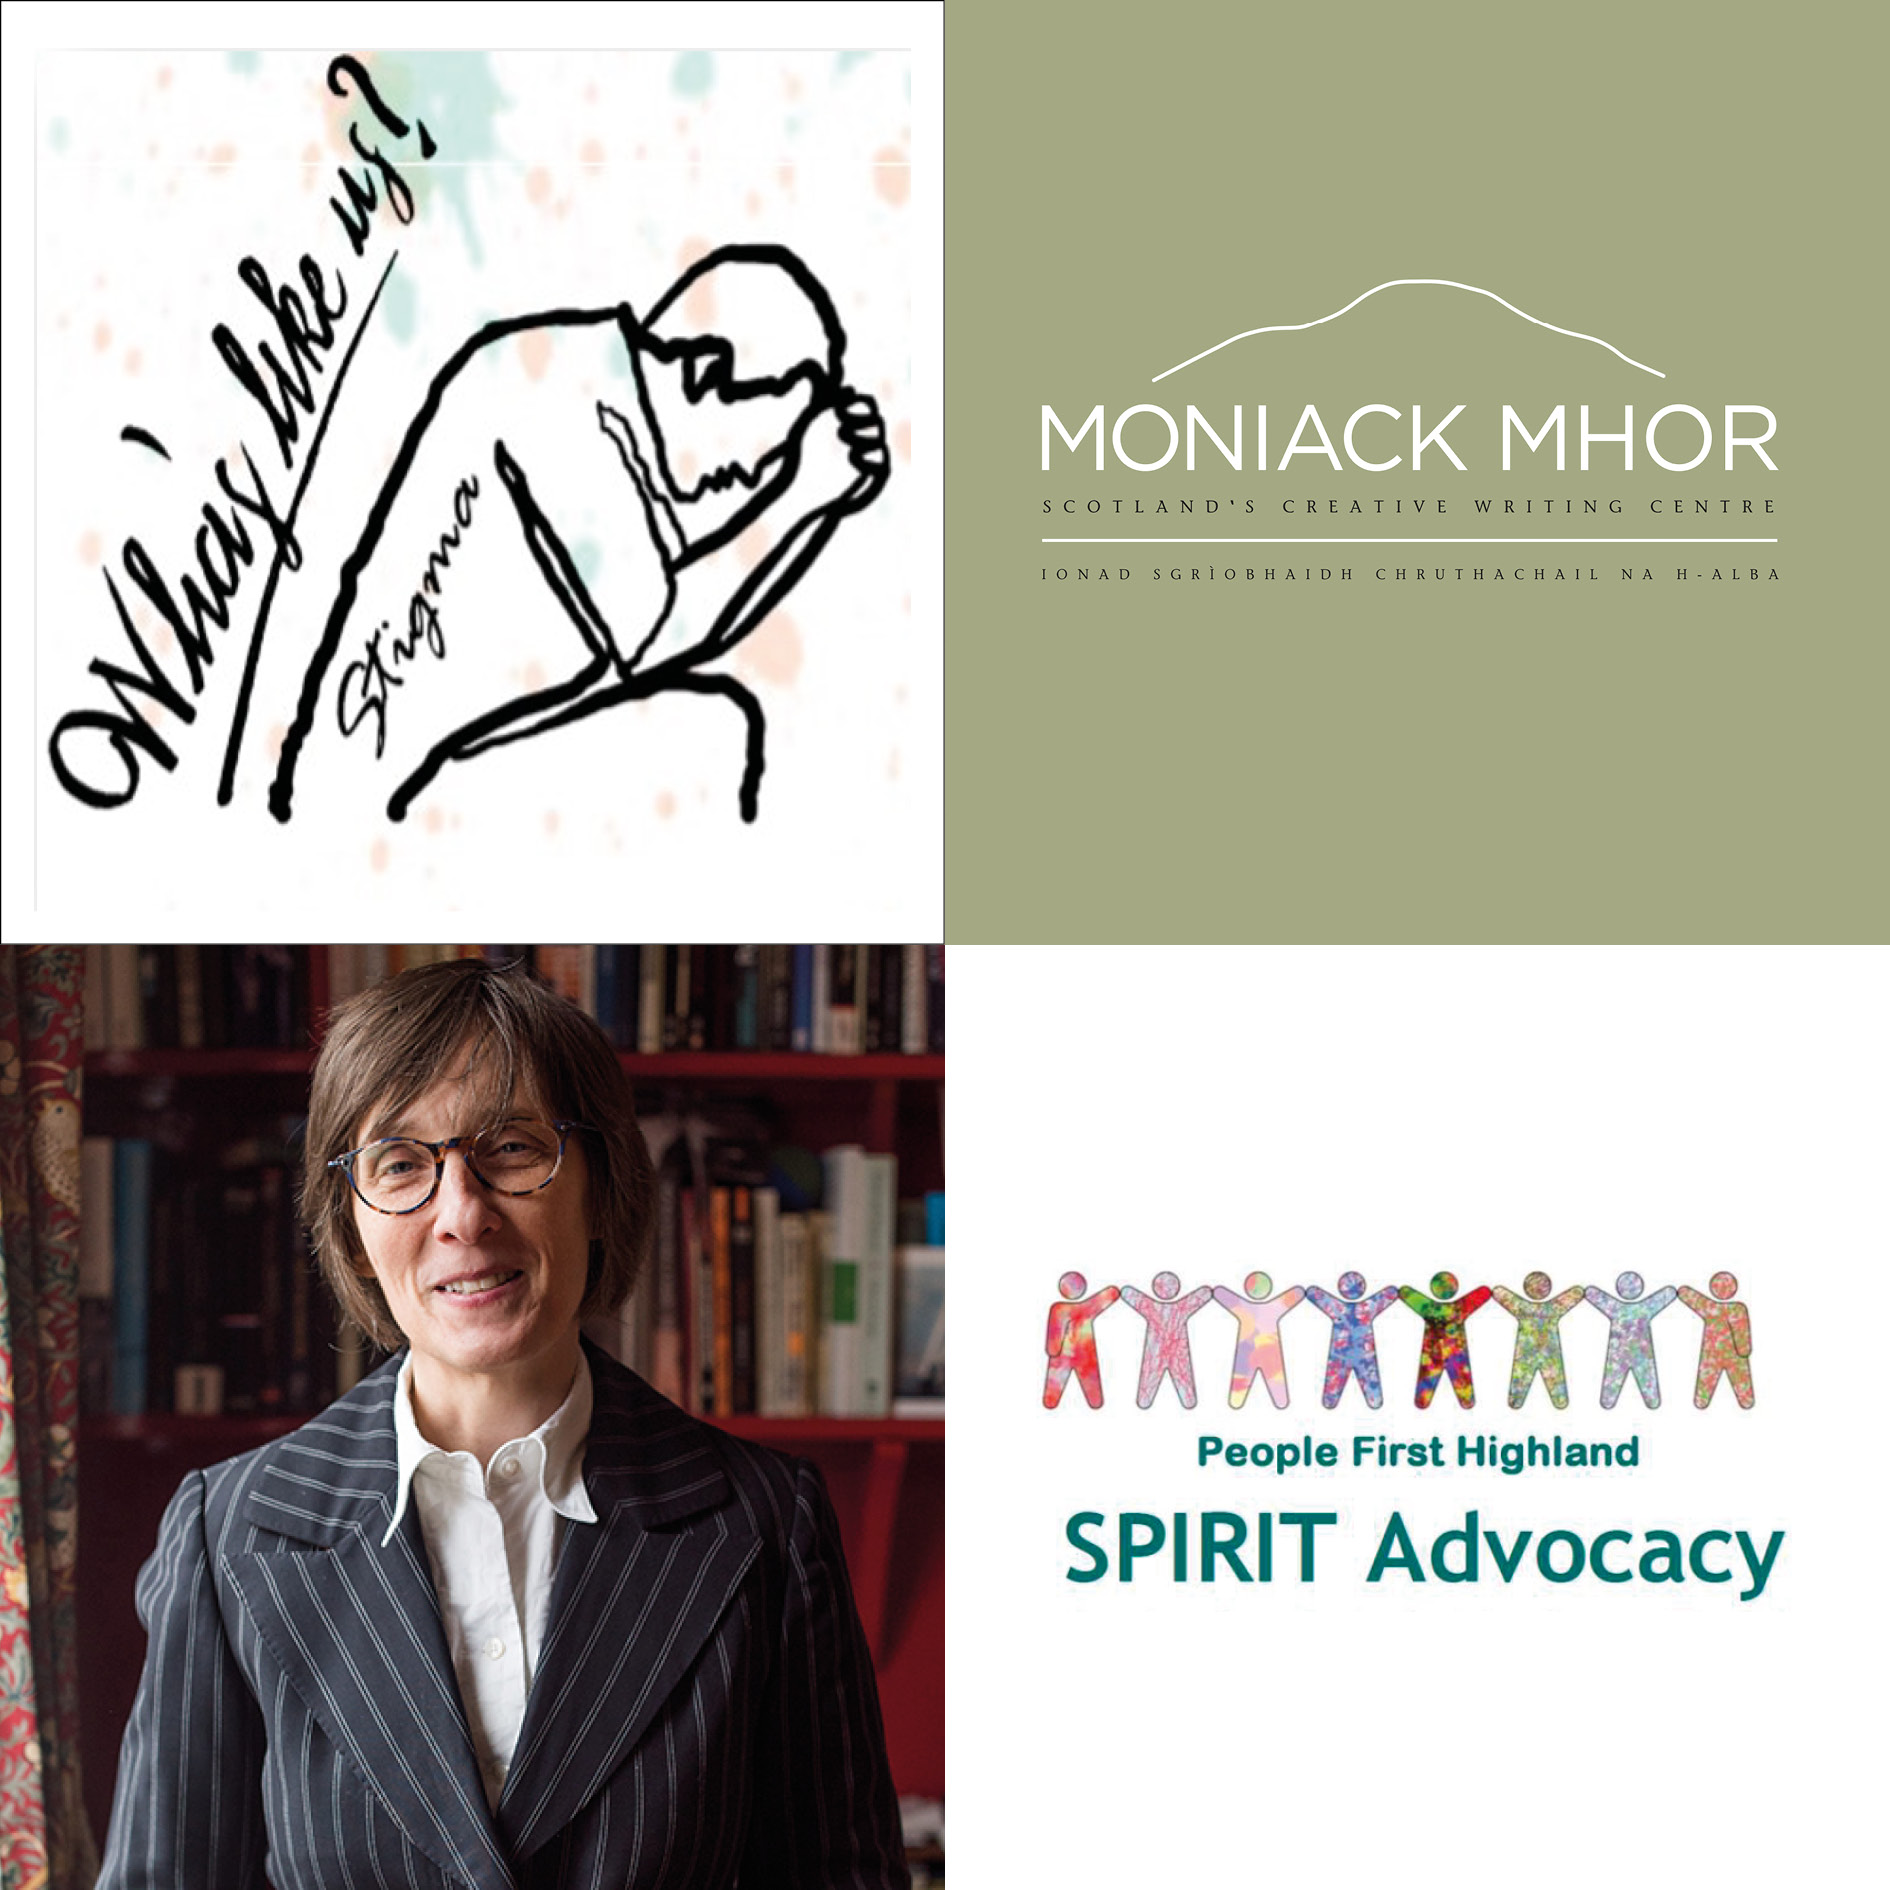 Spirit Advocacy Workshop: Online Comedy Writing with A.L. Kennedy